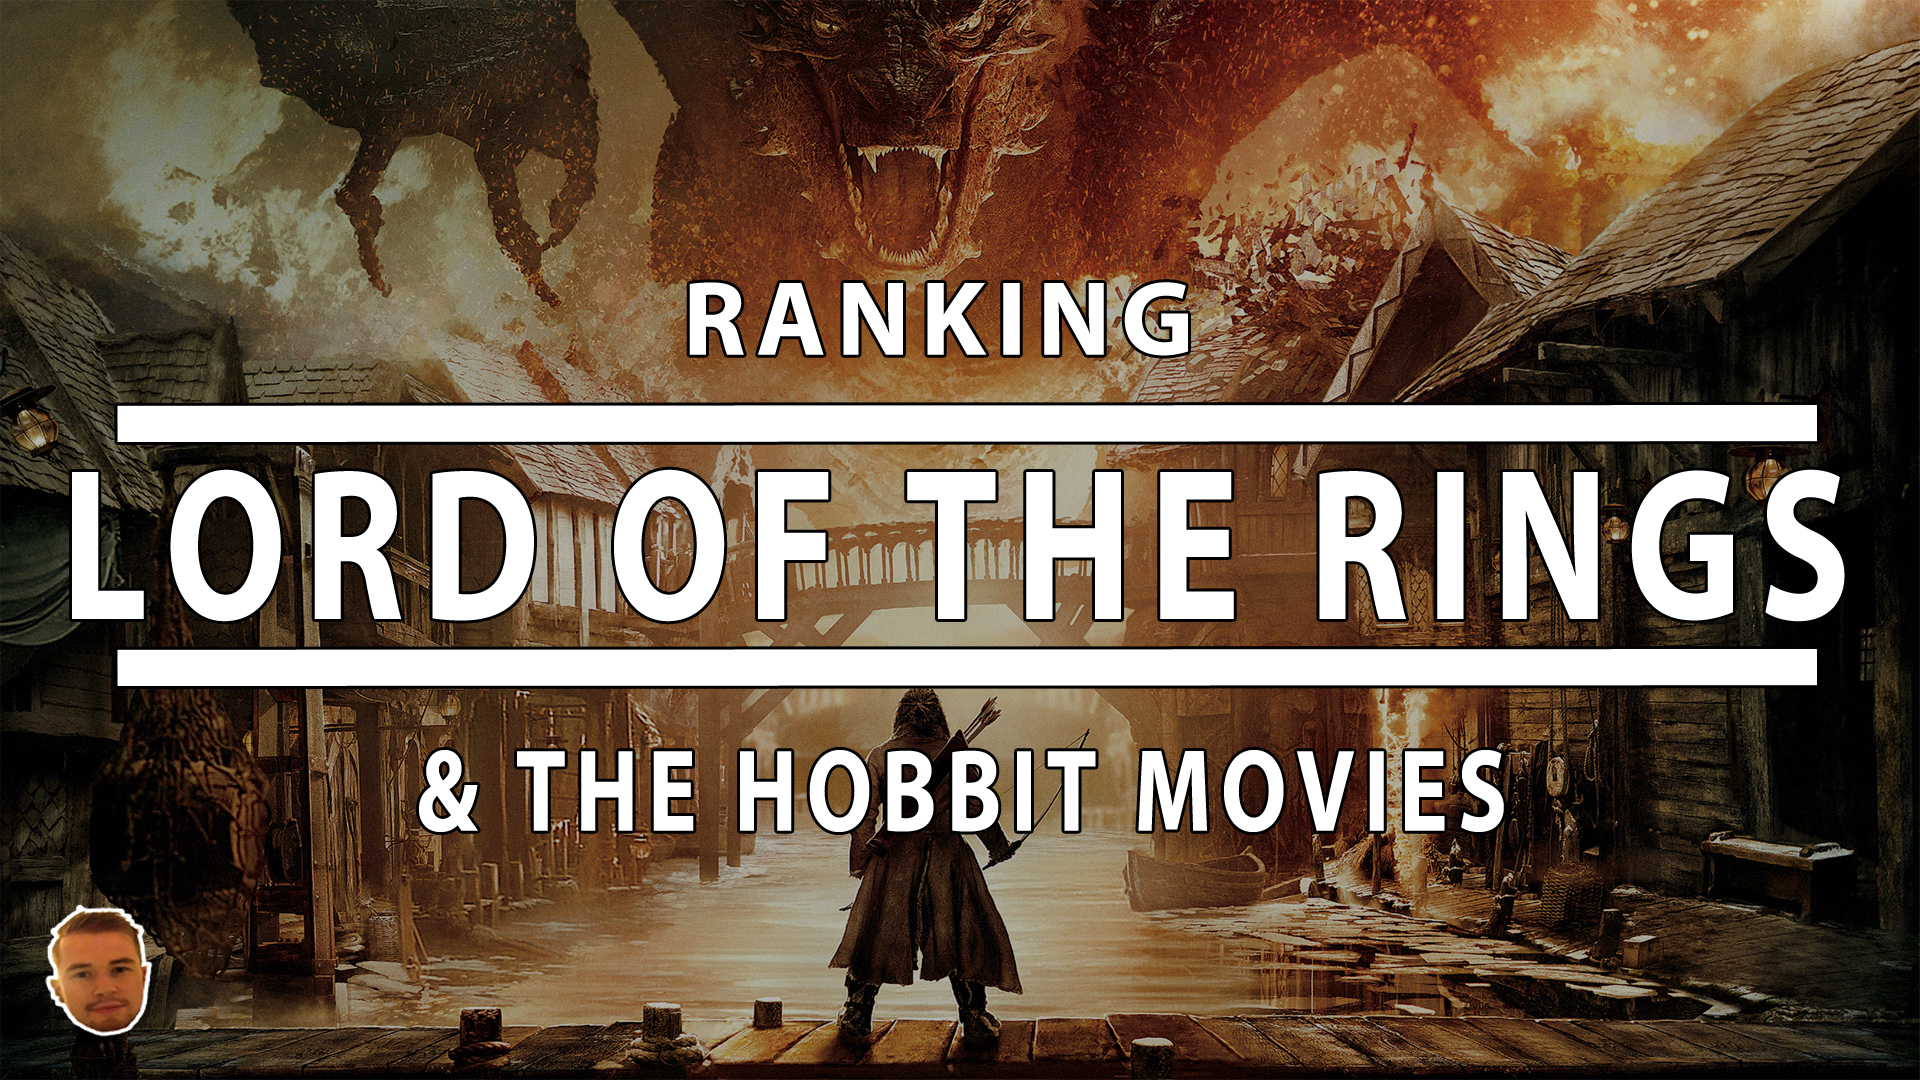 Ranking all the lord of the rings and hobbit movies by deffinition as part of film talk